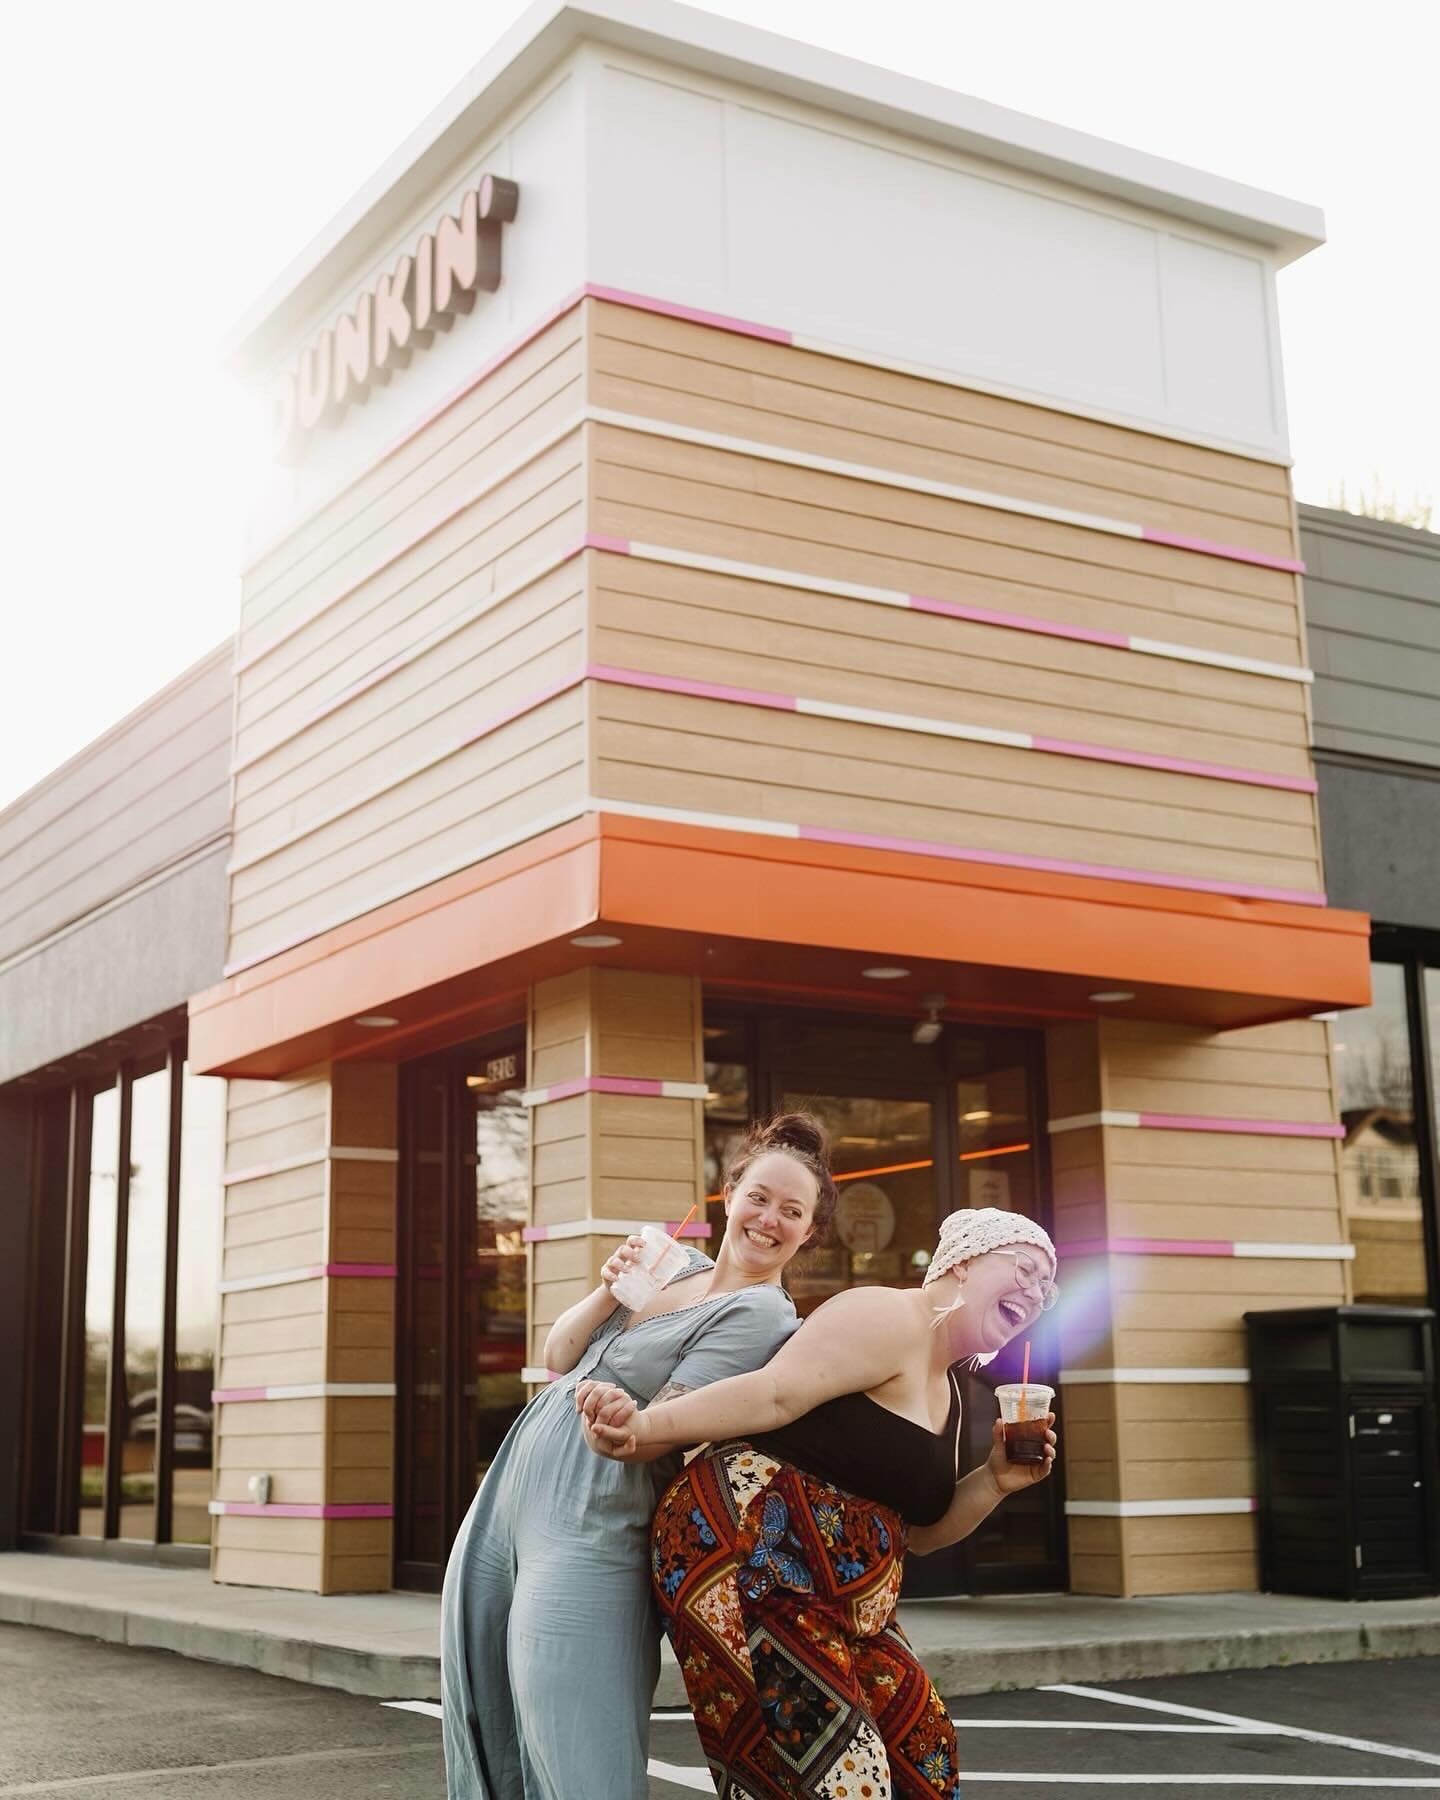 Janelle + Alex // 5.25.24 🍩

Started this cutie engagement session @dunkin &amp; boy oh boy these two did did not disappoint! Cannot wait for their wedding at the end of the month 🤩